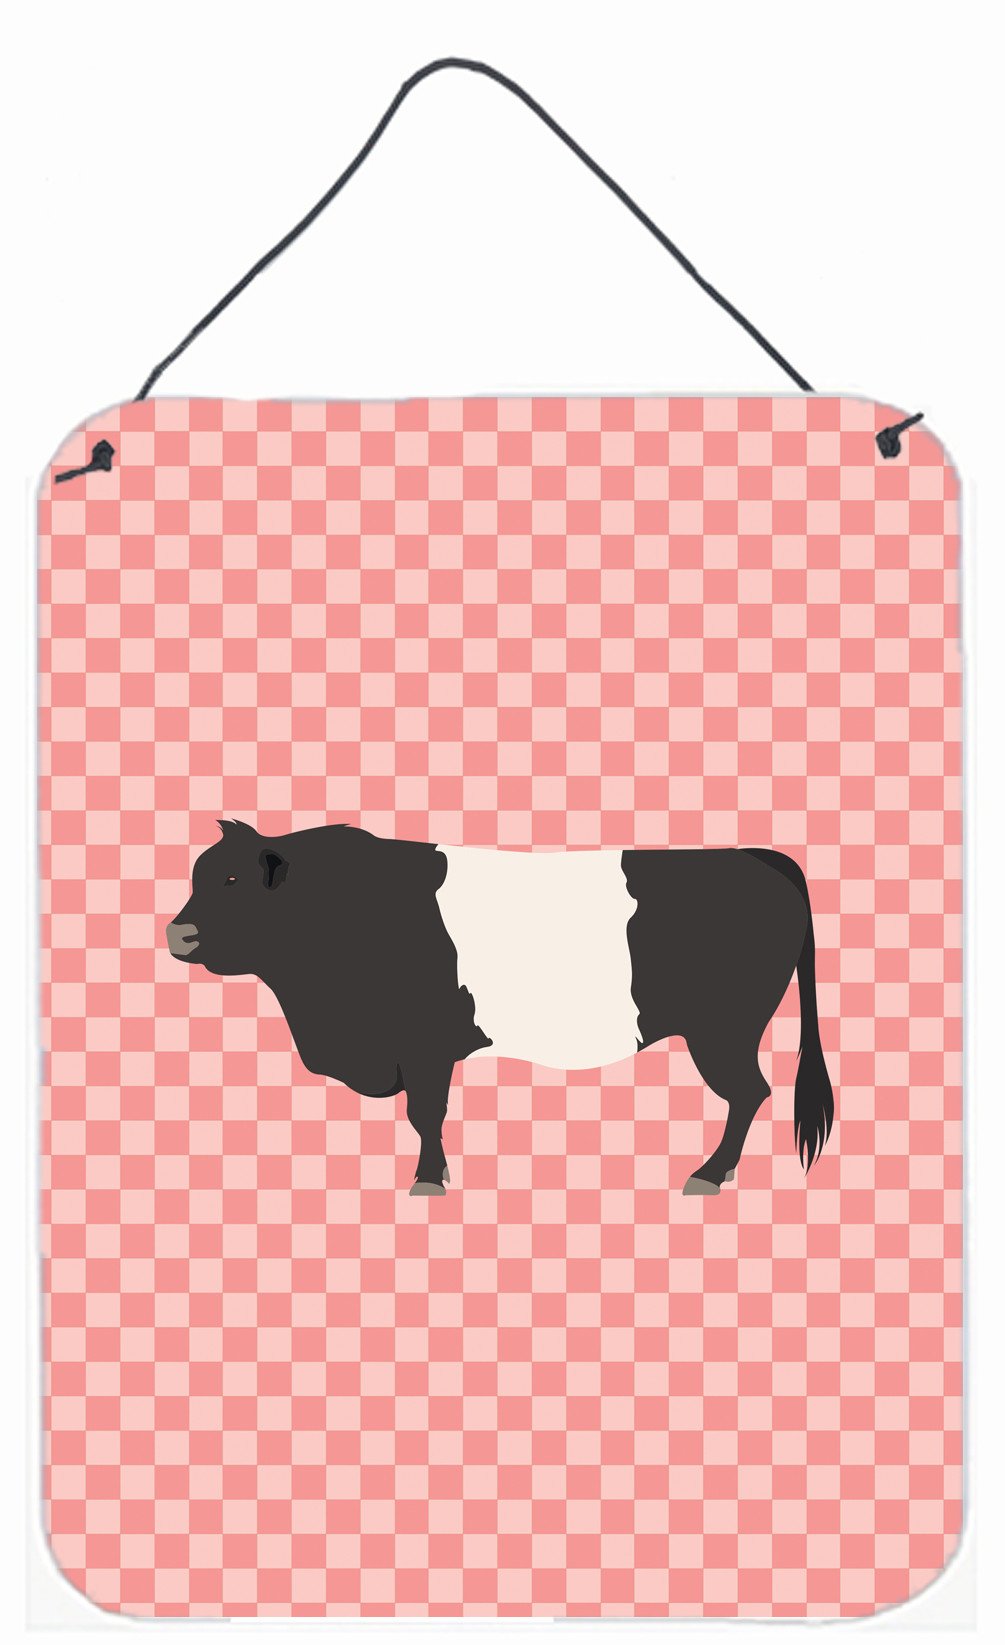 Belted Galloway Cow Pink Check Wall or Door Hanging Prints BB7831DS1216 by Caroline's Treasures